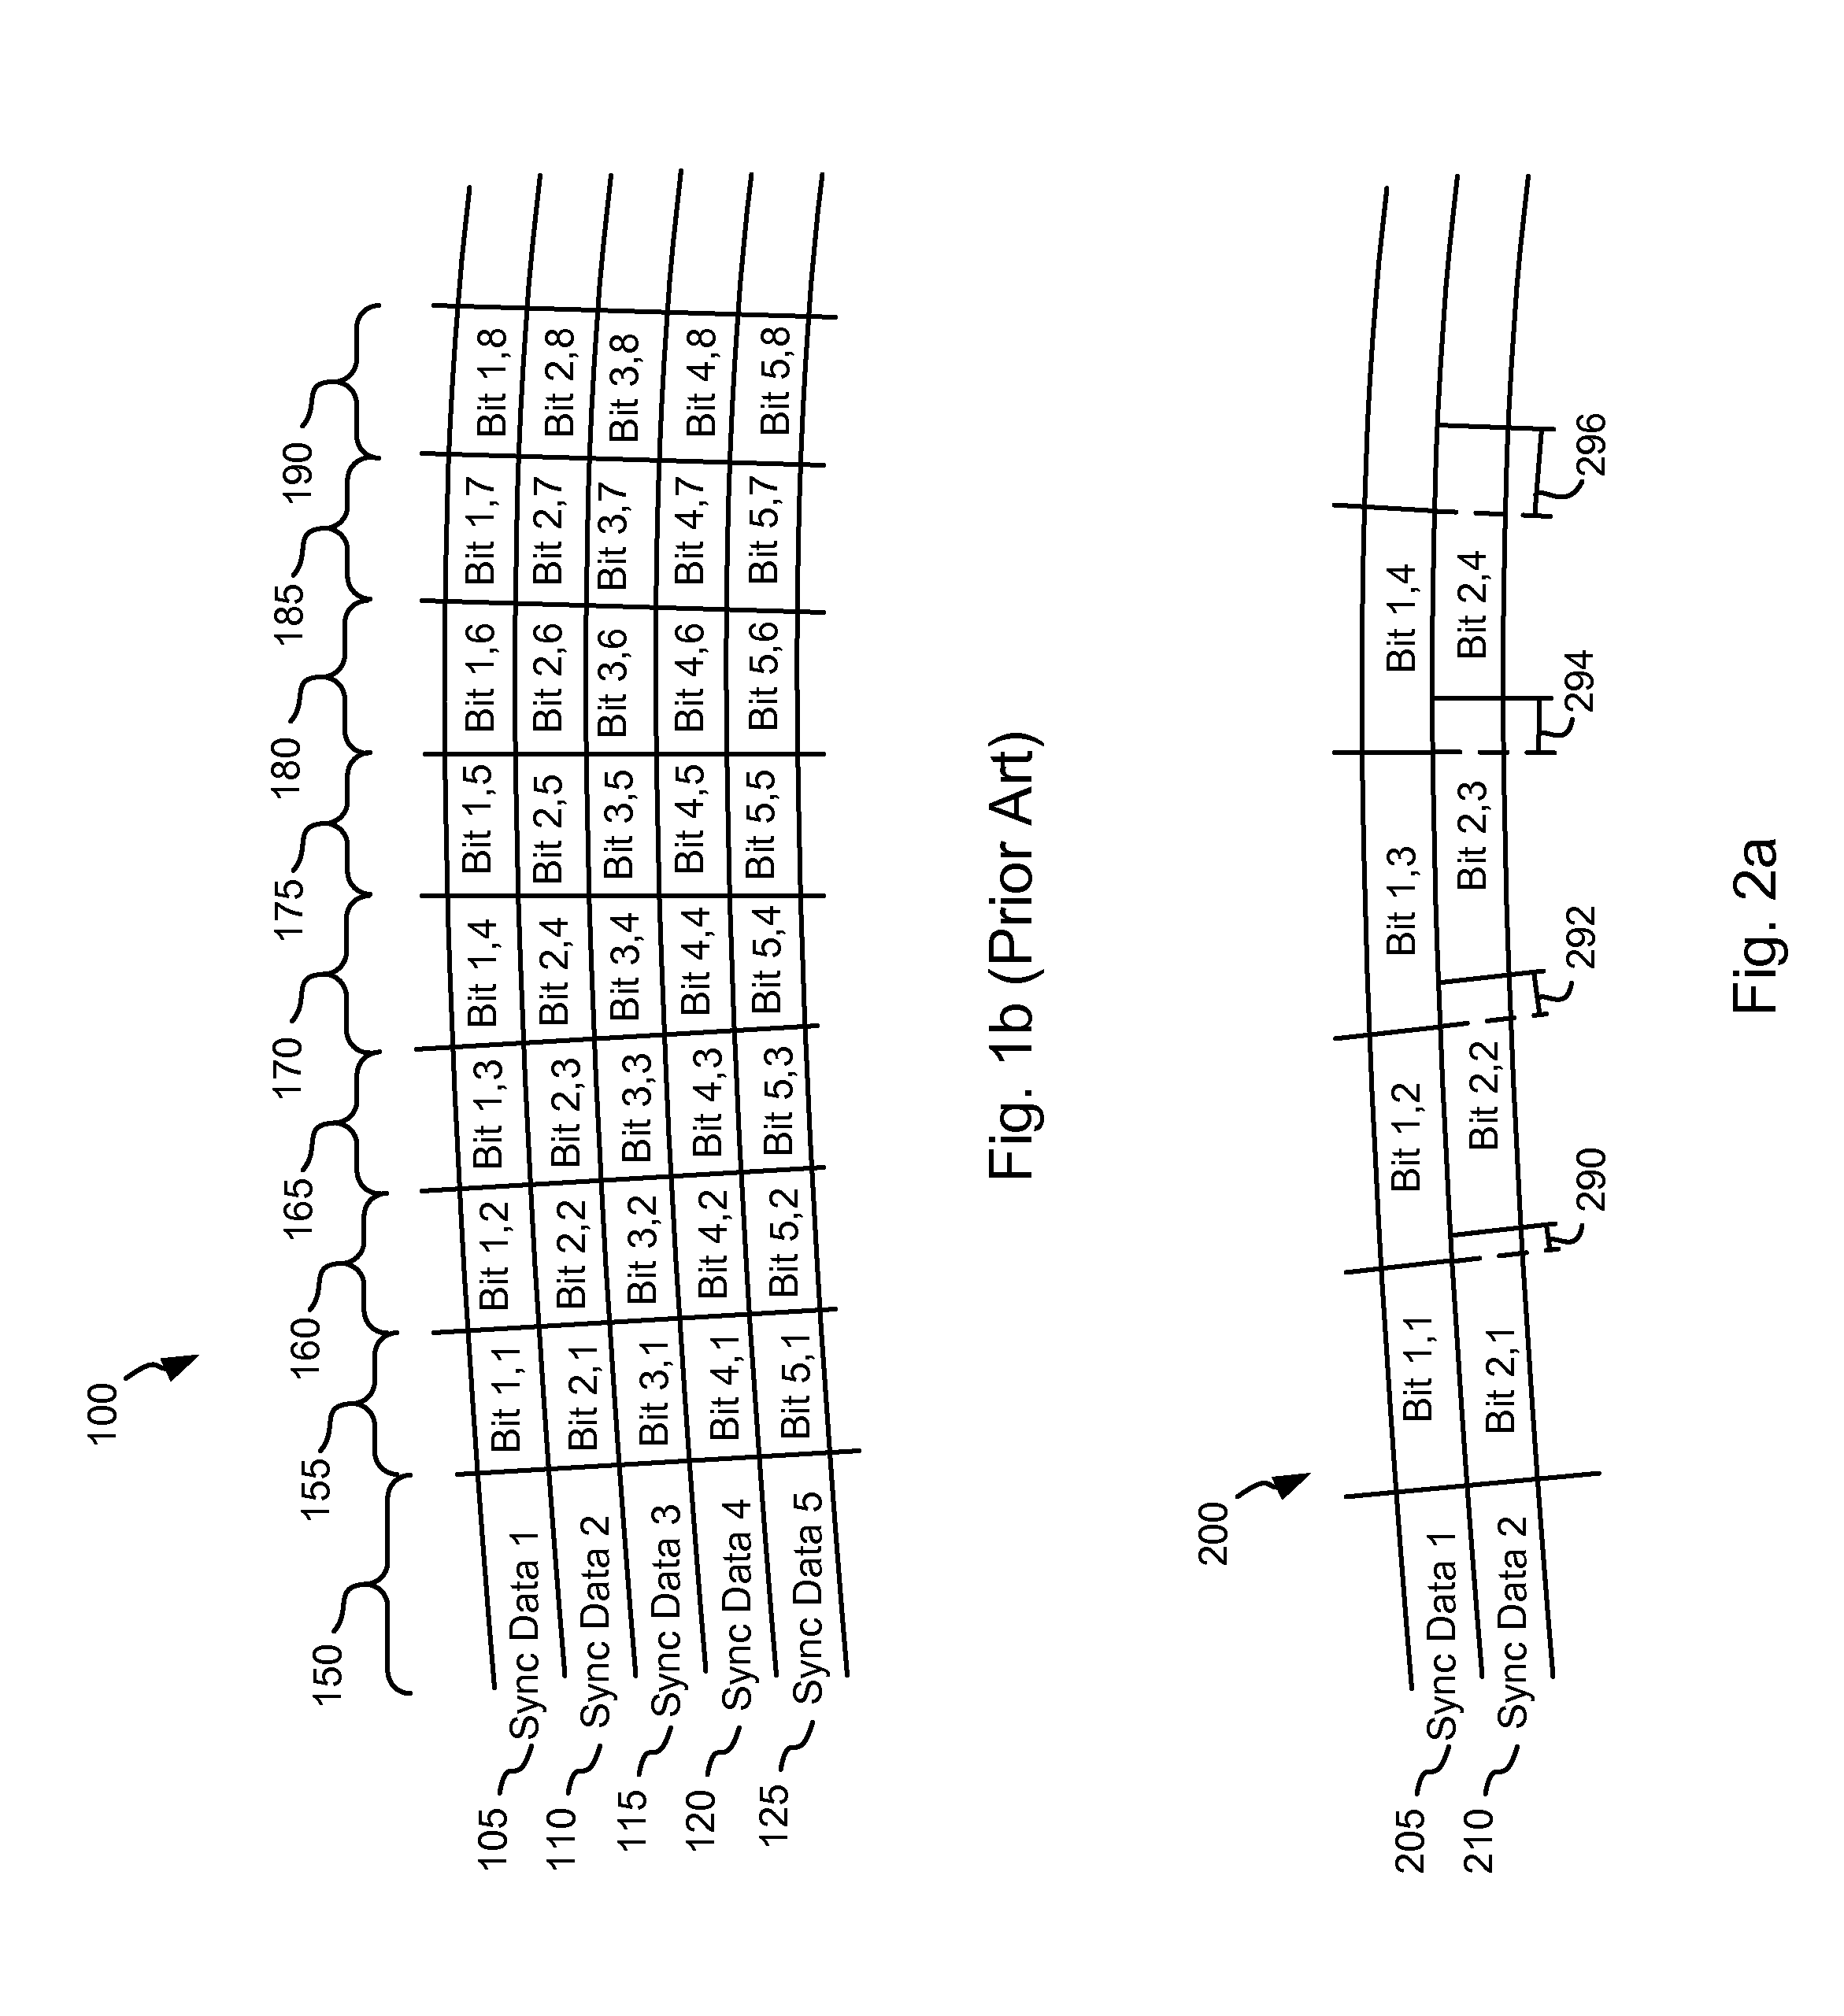 Systems and methods for track to track phase alignment